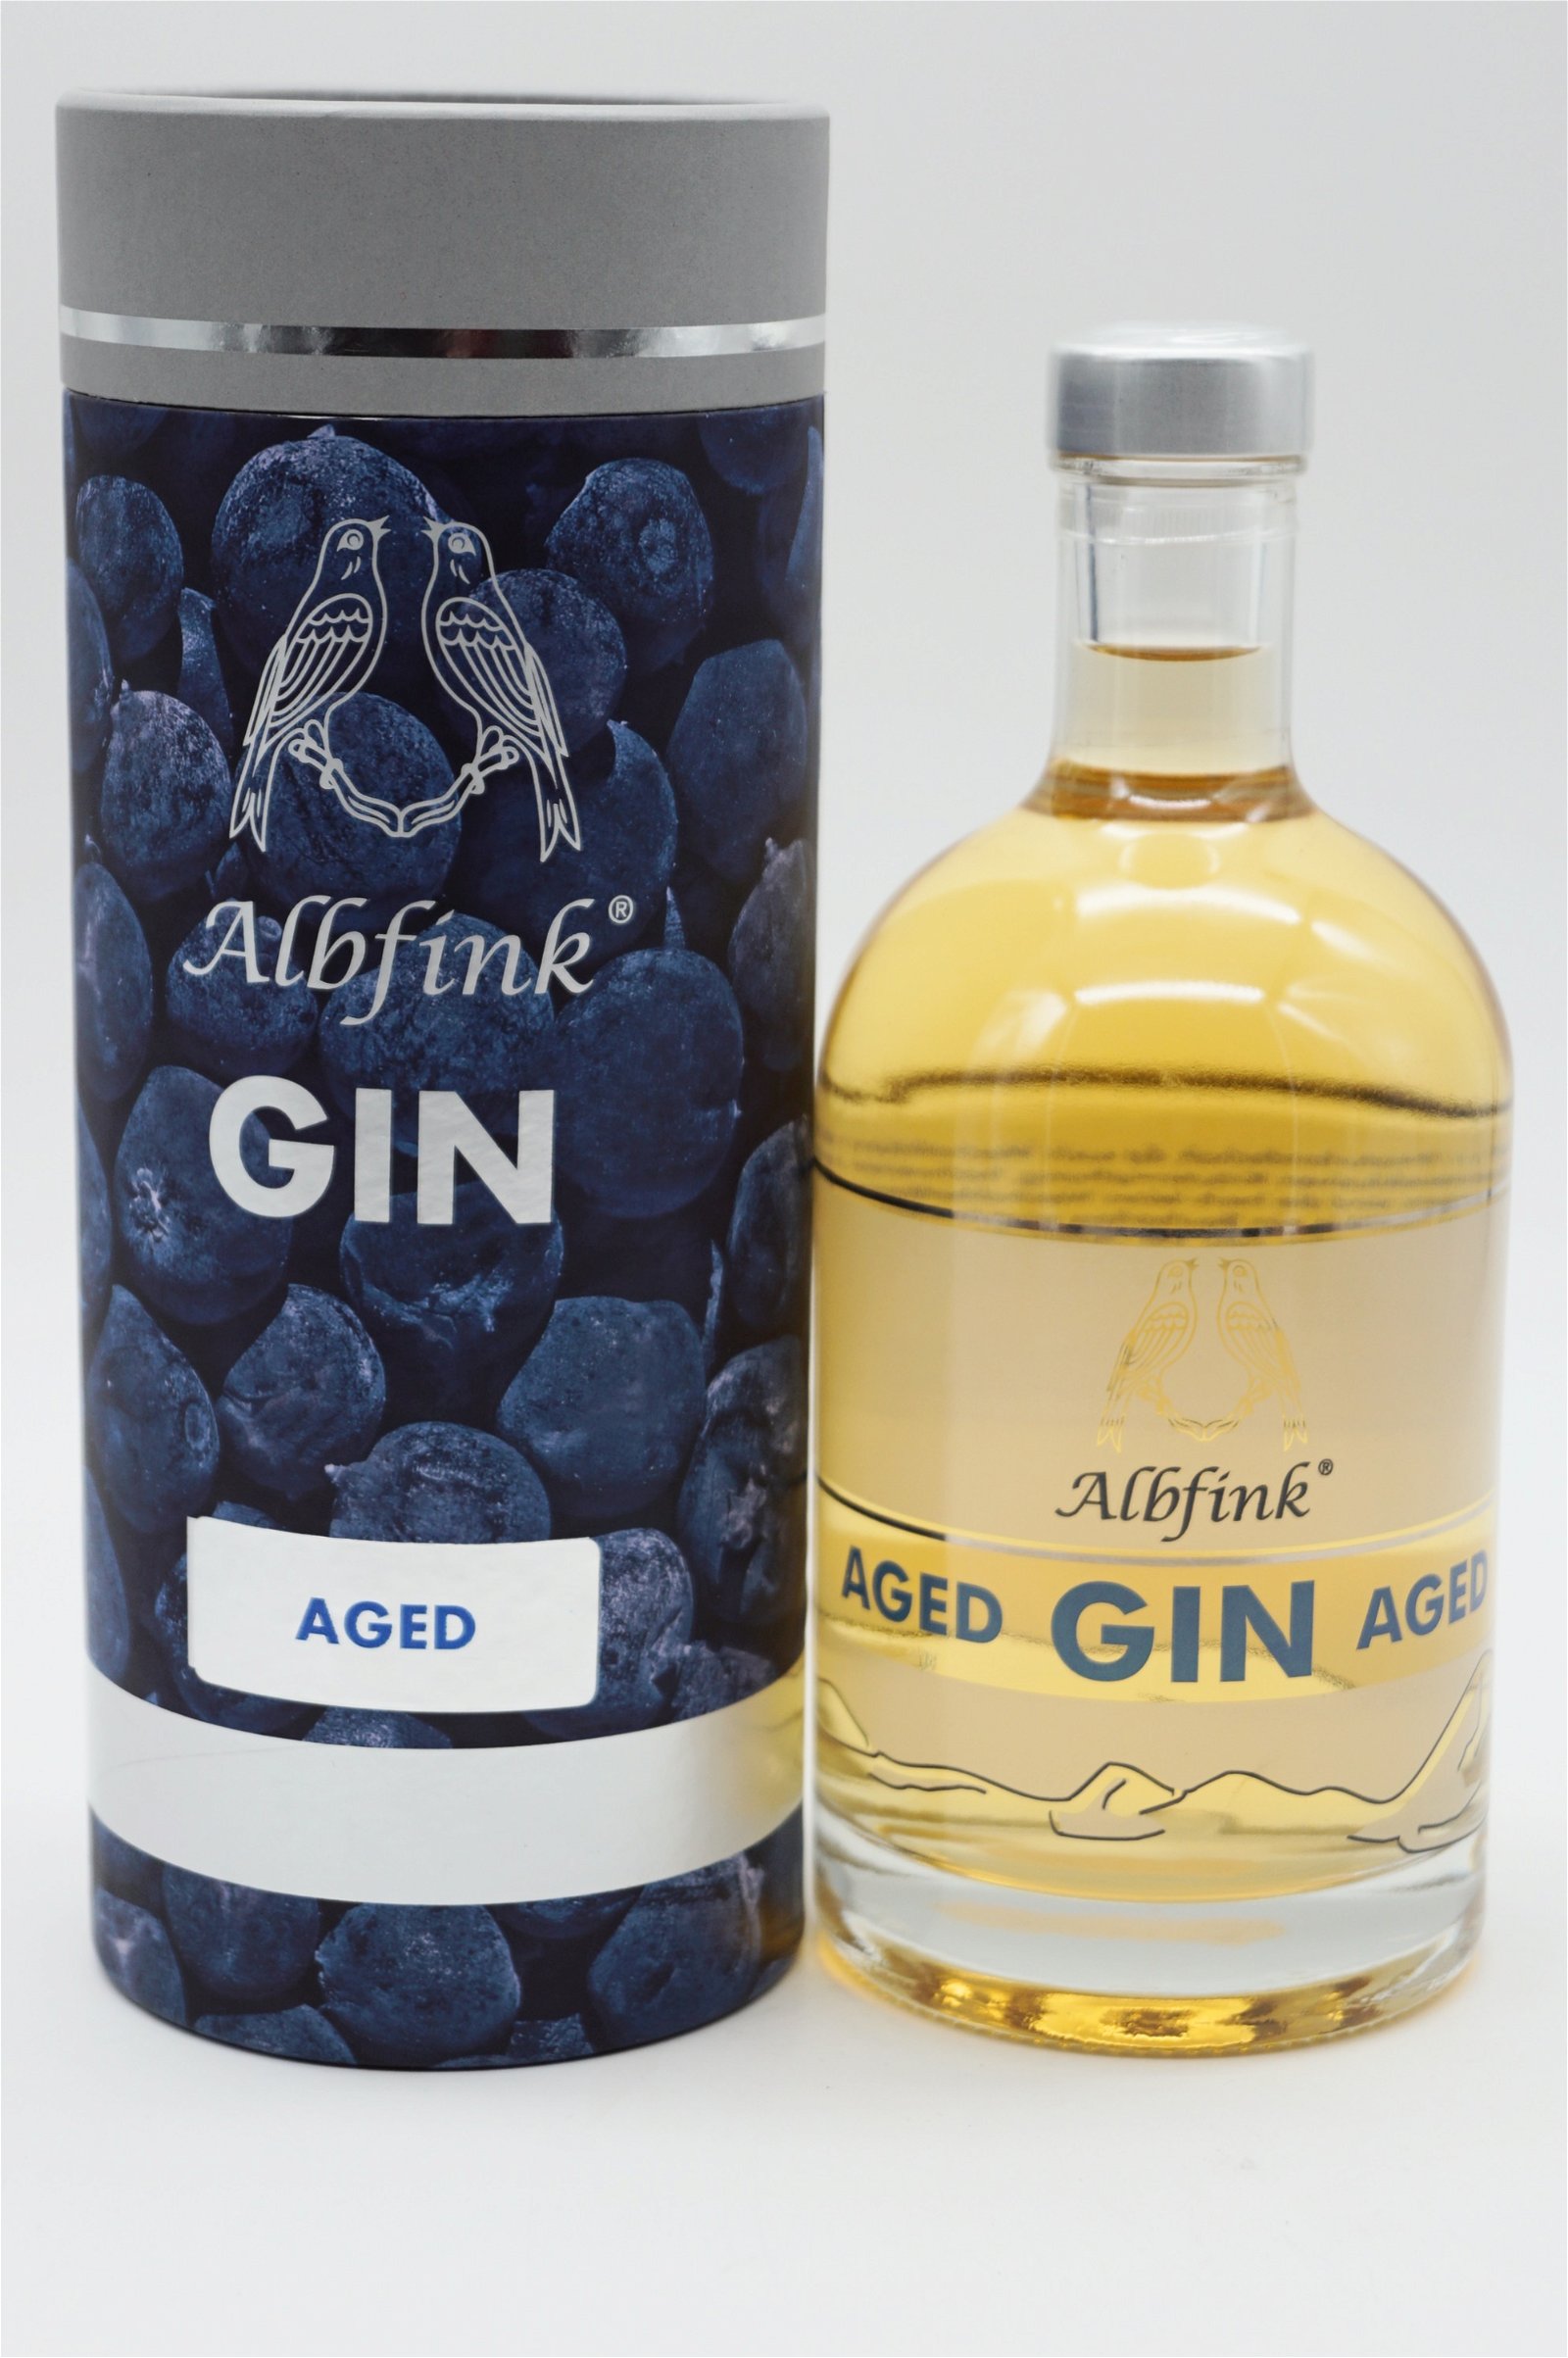 Albfink Aged Gin Limited Edition